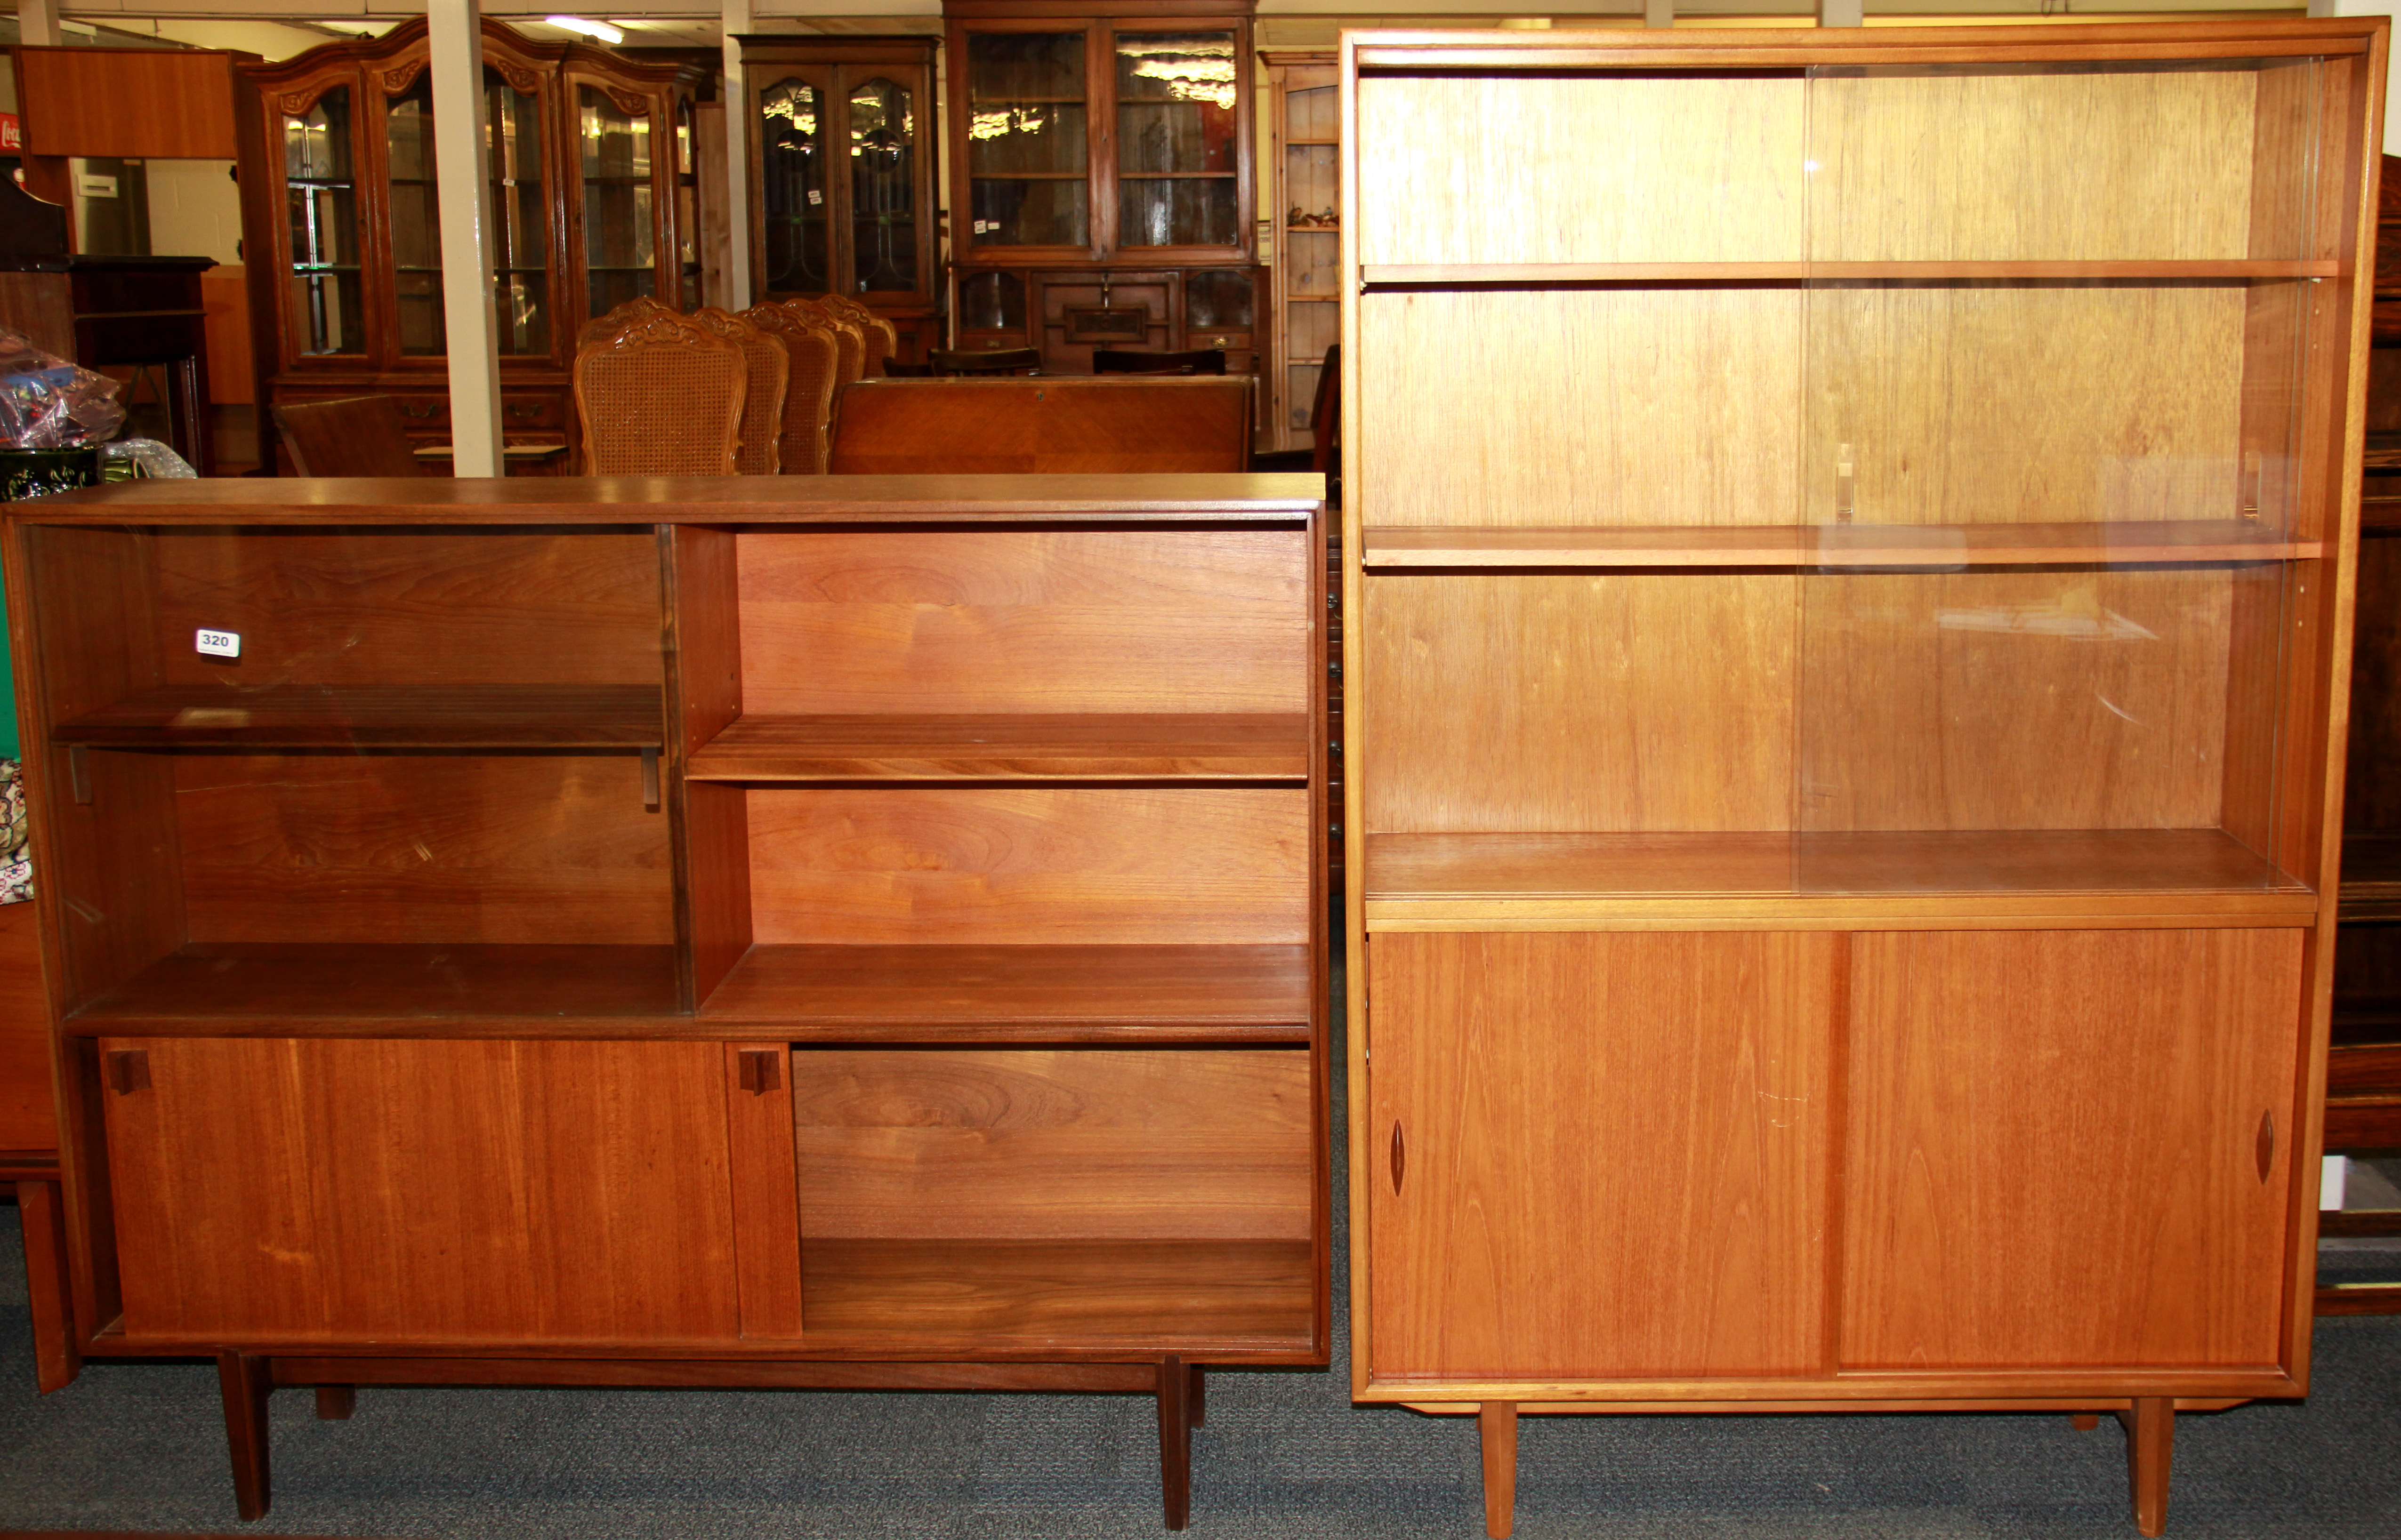 Two 1970's teak bookcases by Herbert E Gibbs Limited, sizes 122 x 101, 143 x 91cm.